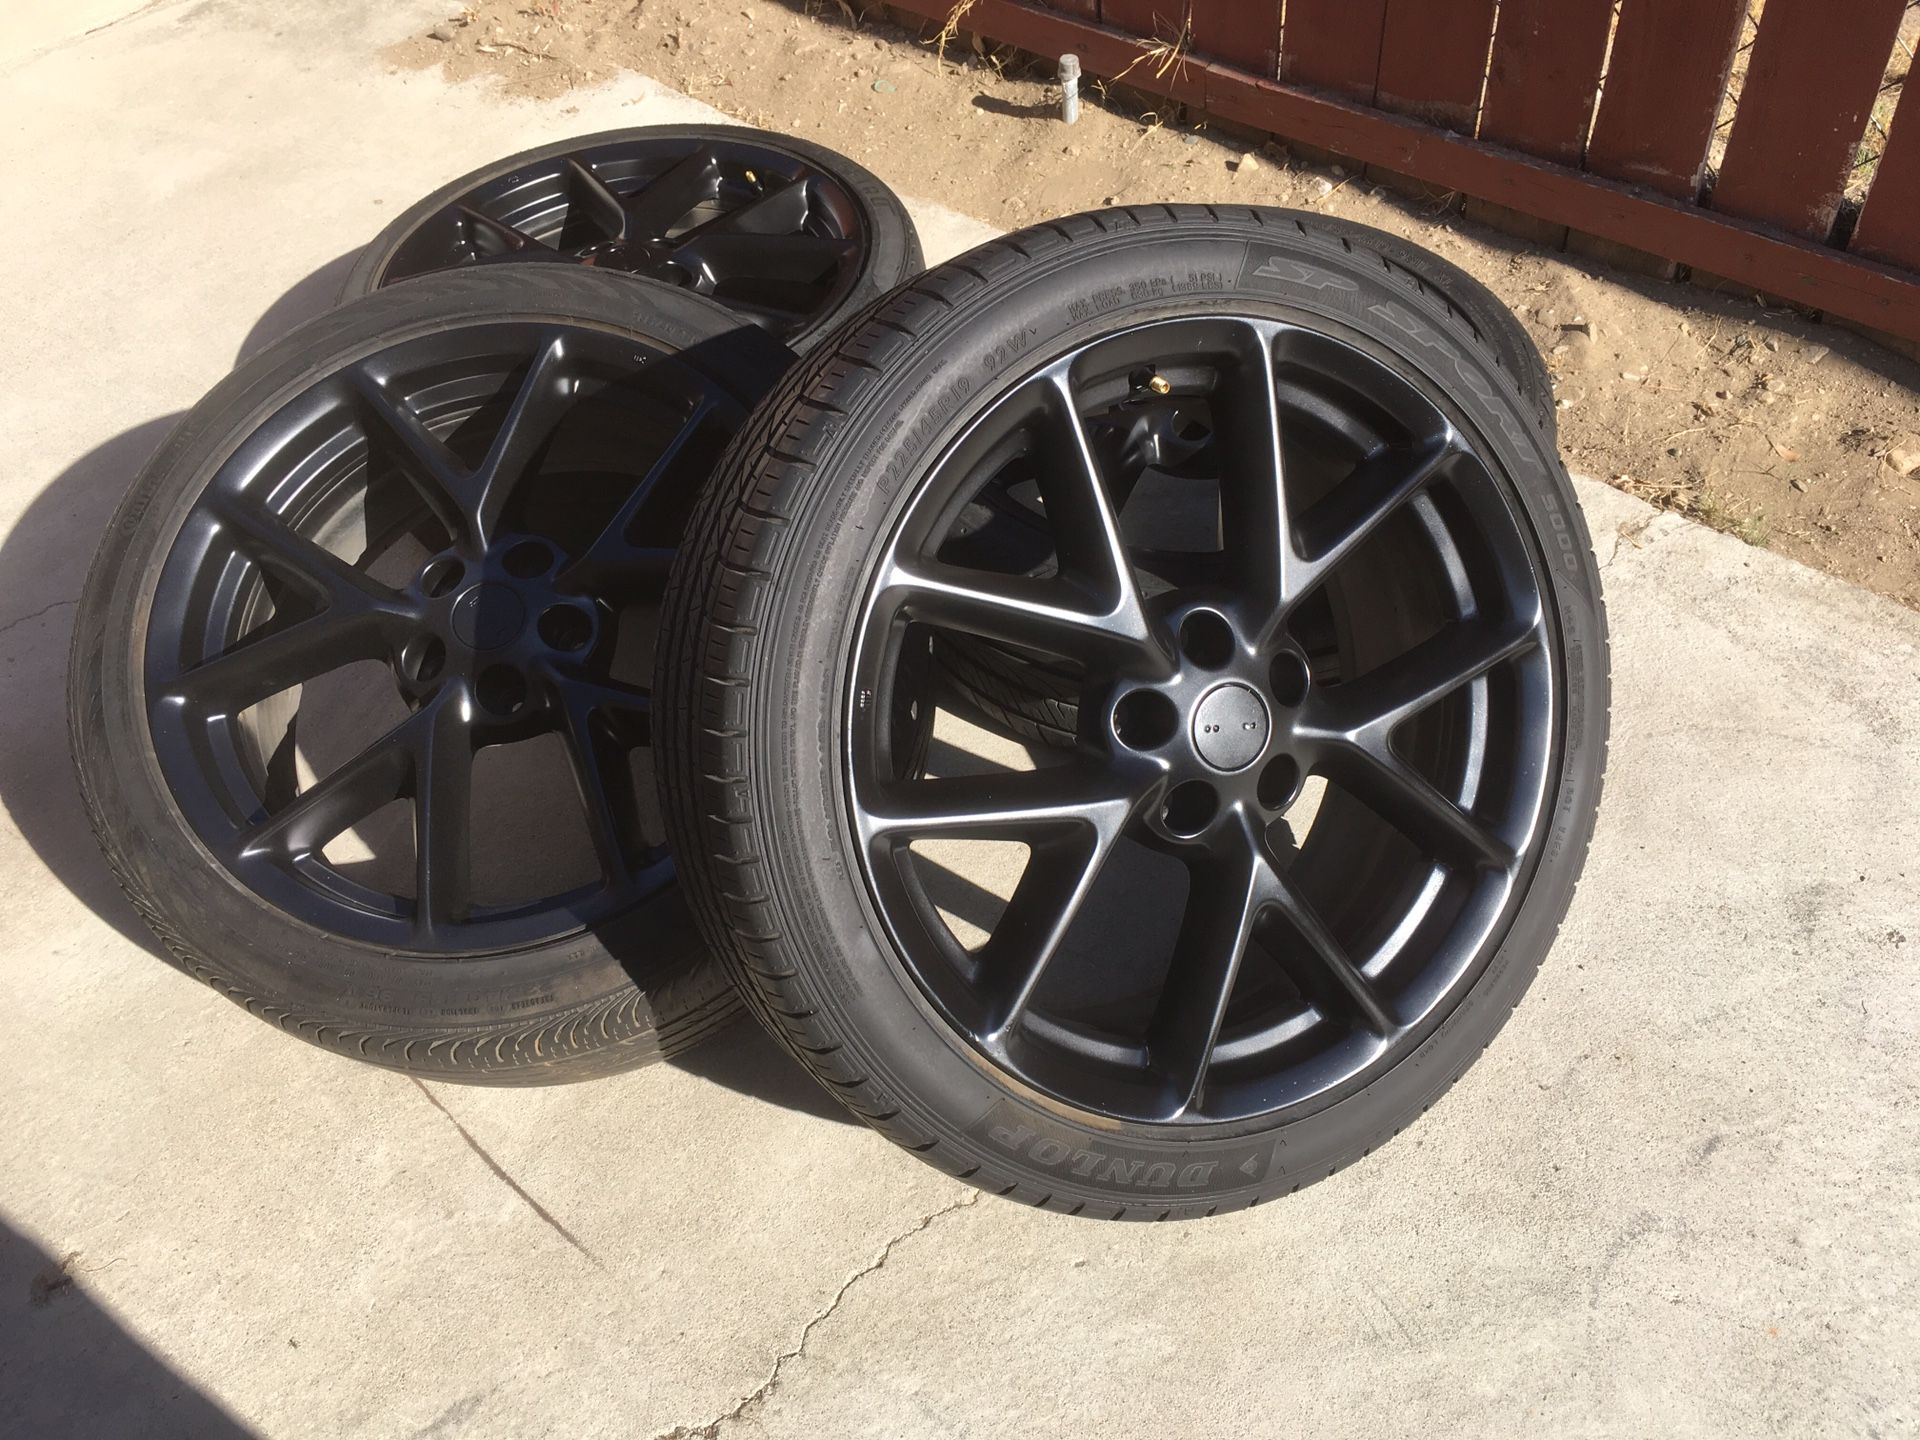 19 inch rims and tires $320